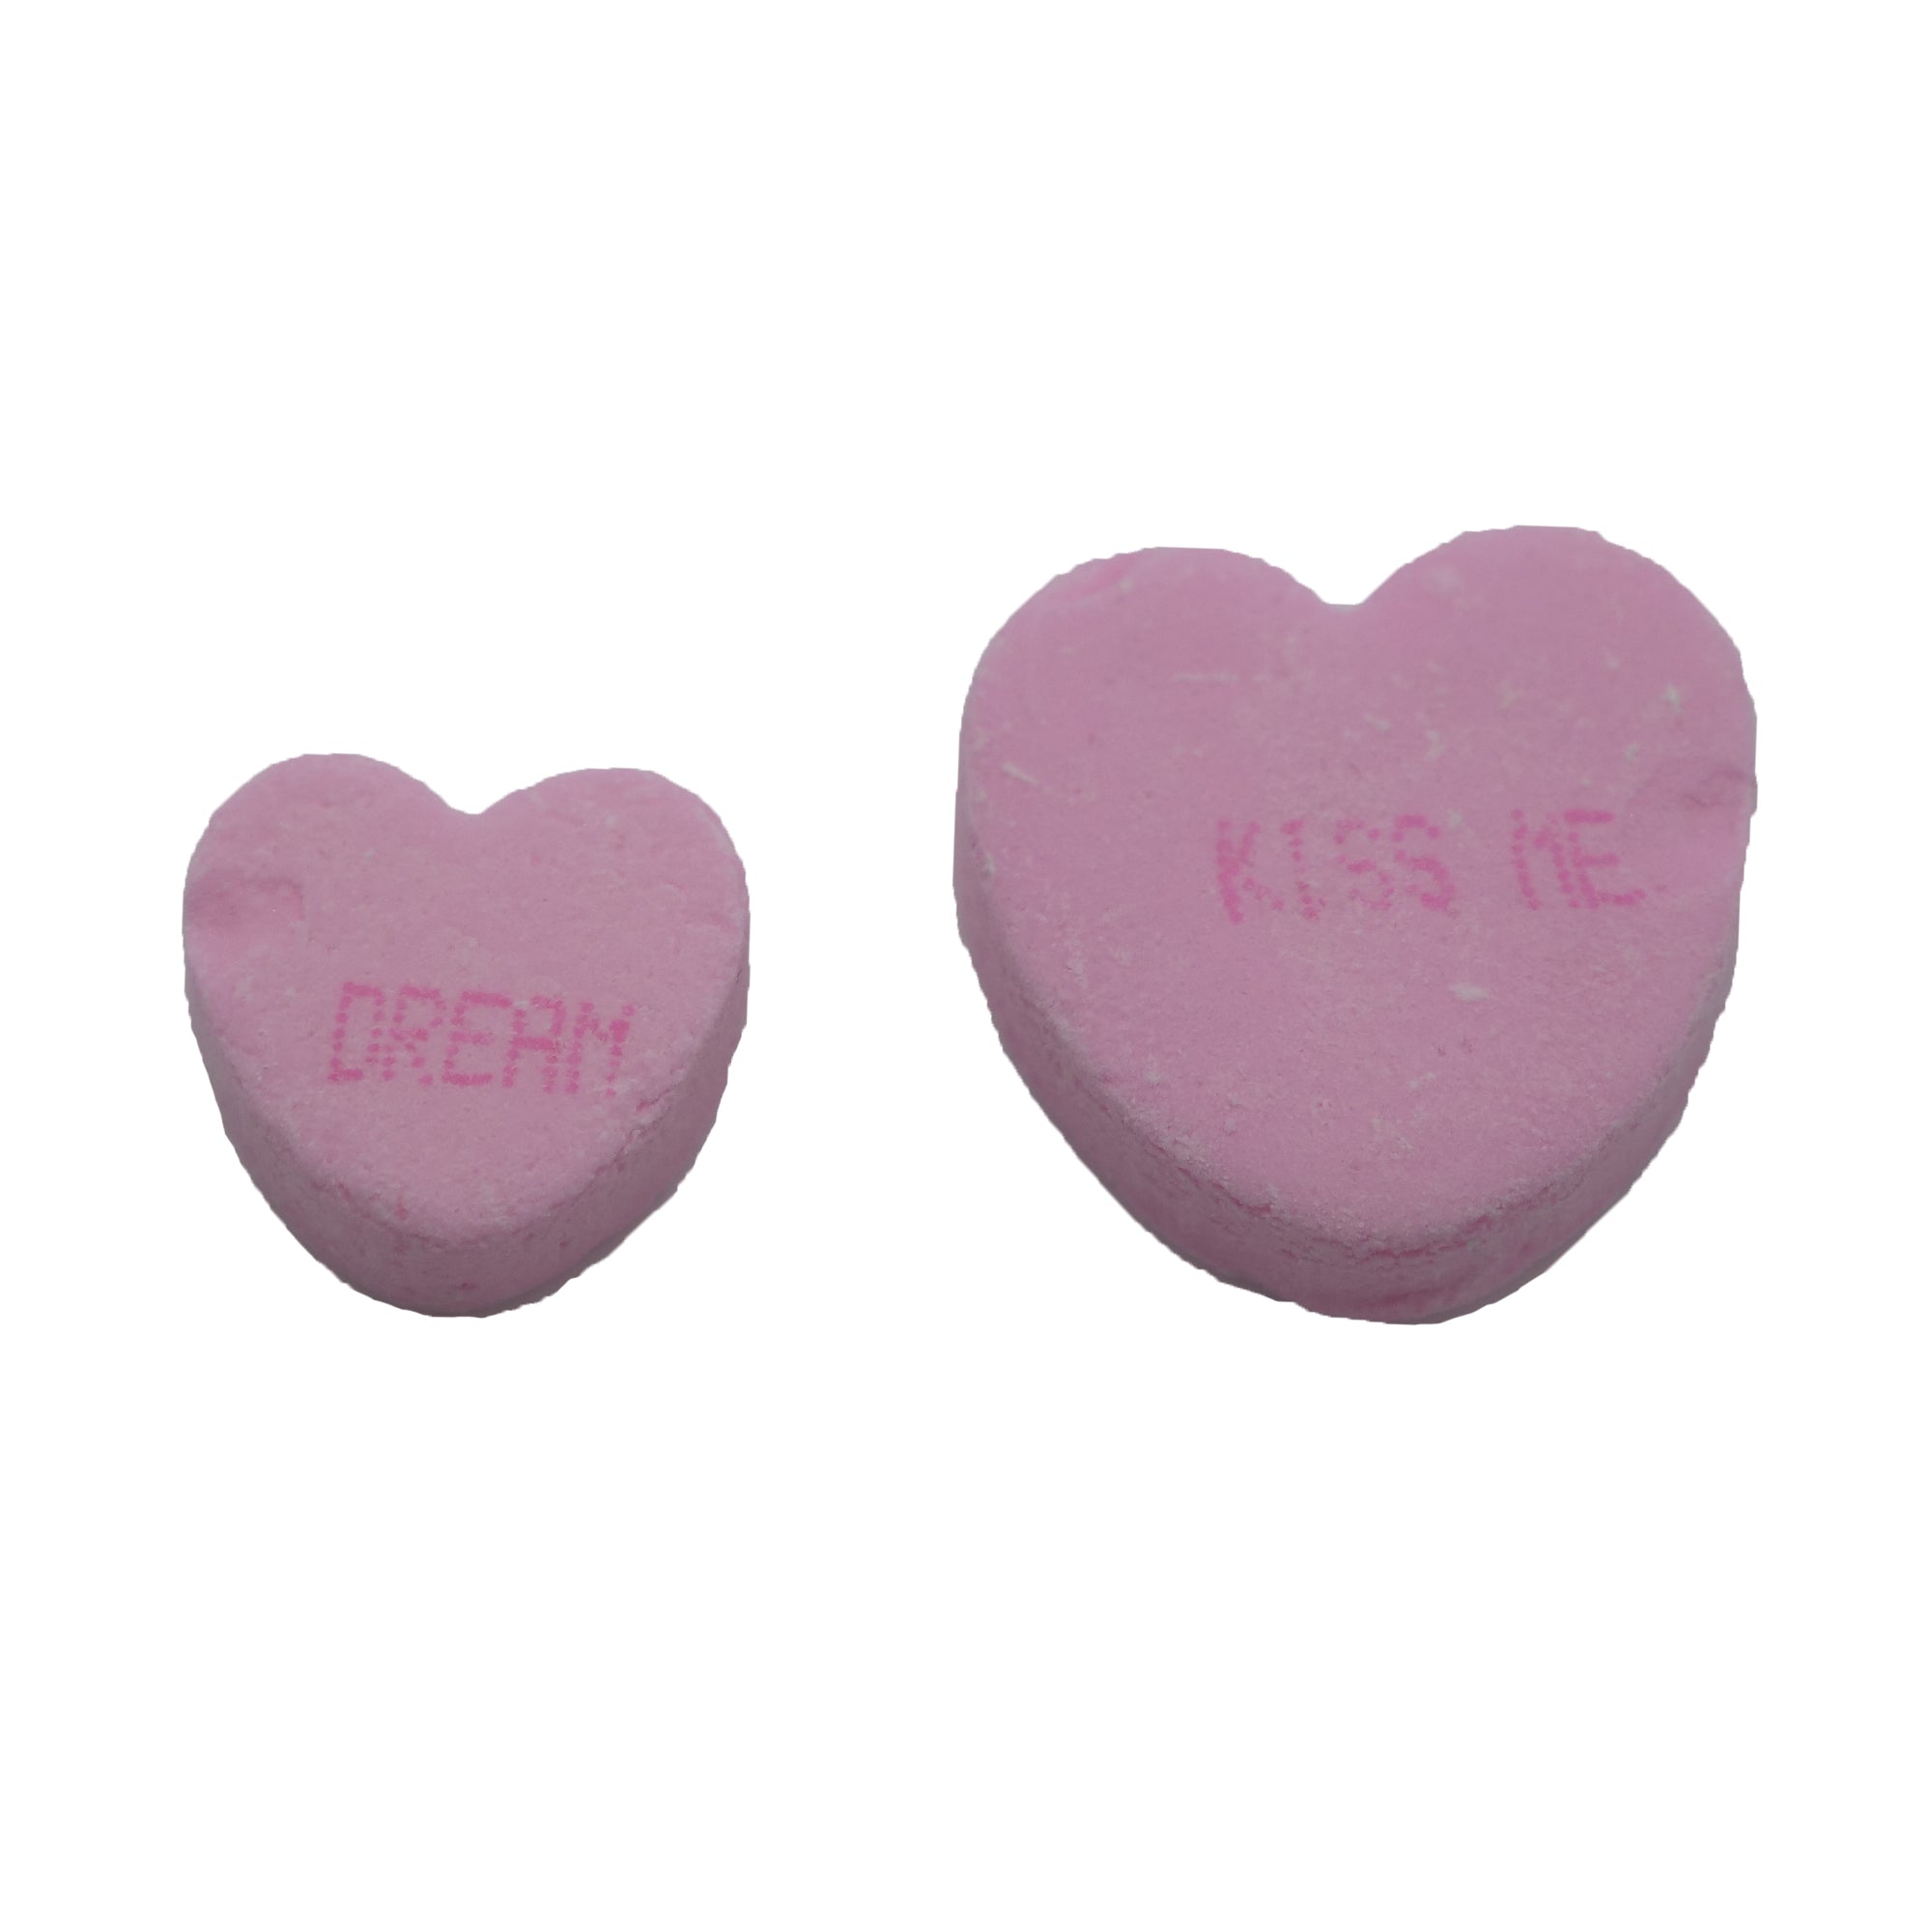 2023 Pamp 30gm Sweethearts Candy Hearts Replica Retro Packaging